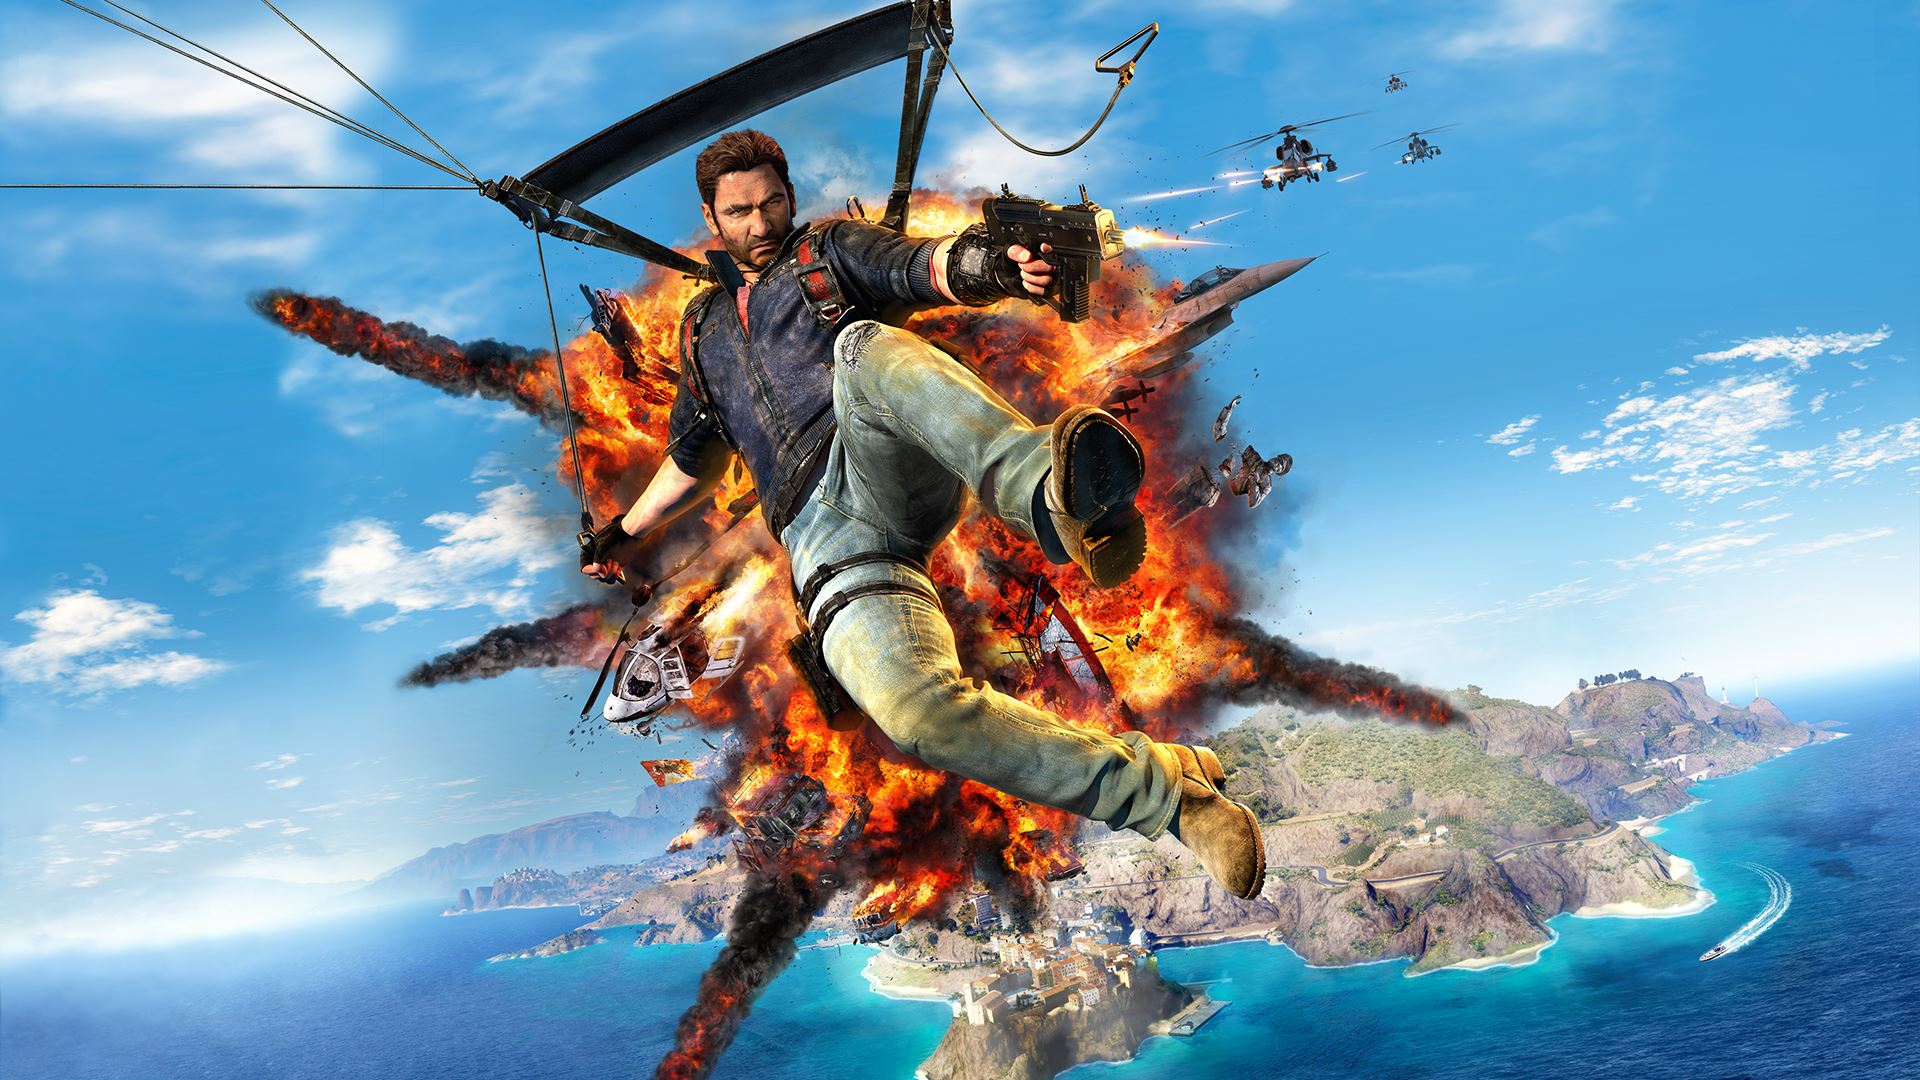 Rico Rodriguez Just Cause Just Cause 3 1920x1080